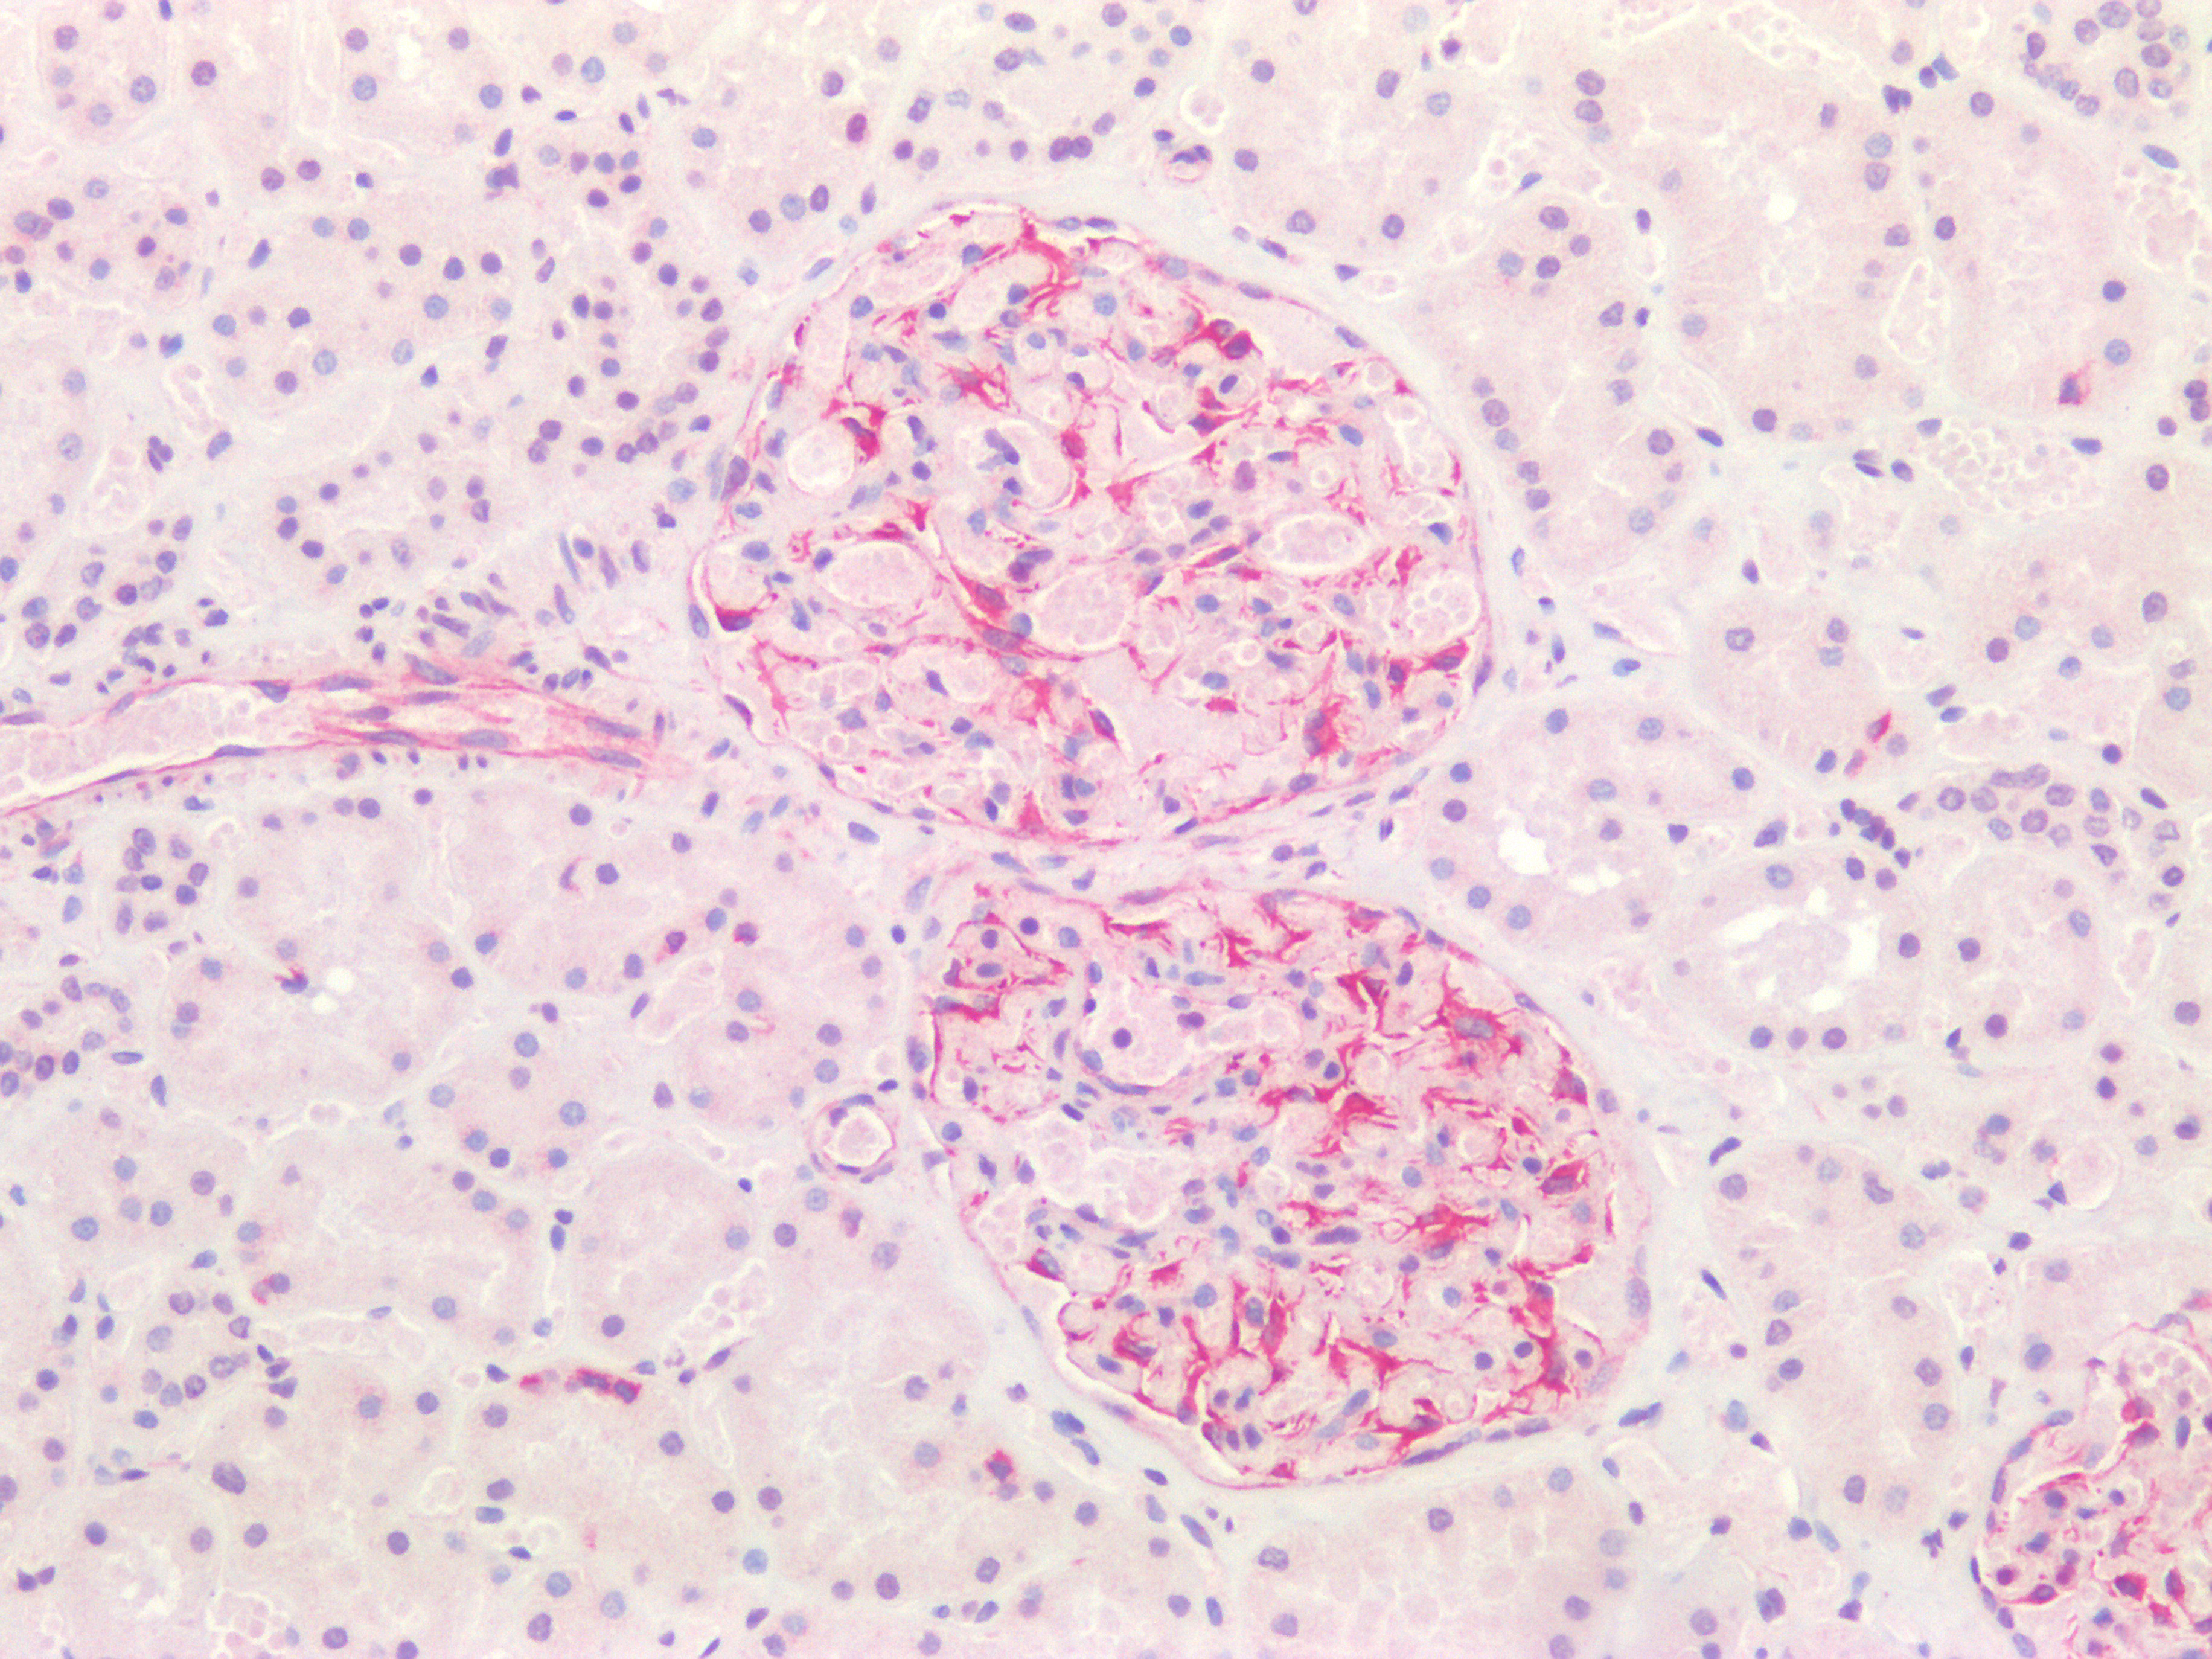 Figure 7. Immunostaining of human paraffin embedded tissue sections of human kidney with MUB1903P (diluted 1:100), showing the specific pattern of vimentin in the mesenchymal cell types, such as fibroblasts in the connective tissue, and podocytes.  As expected, no reactivity is seen in the epithelial cell compartment.